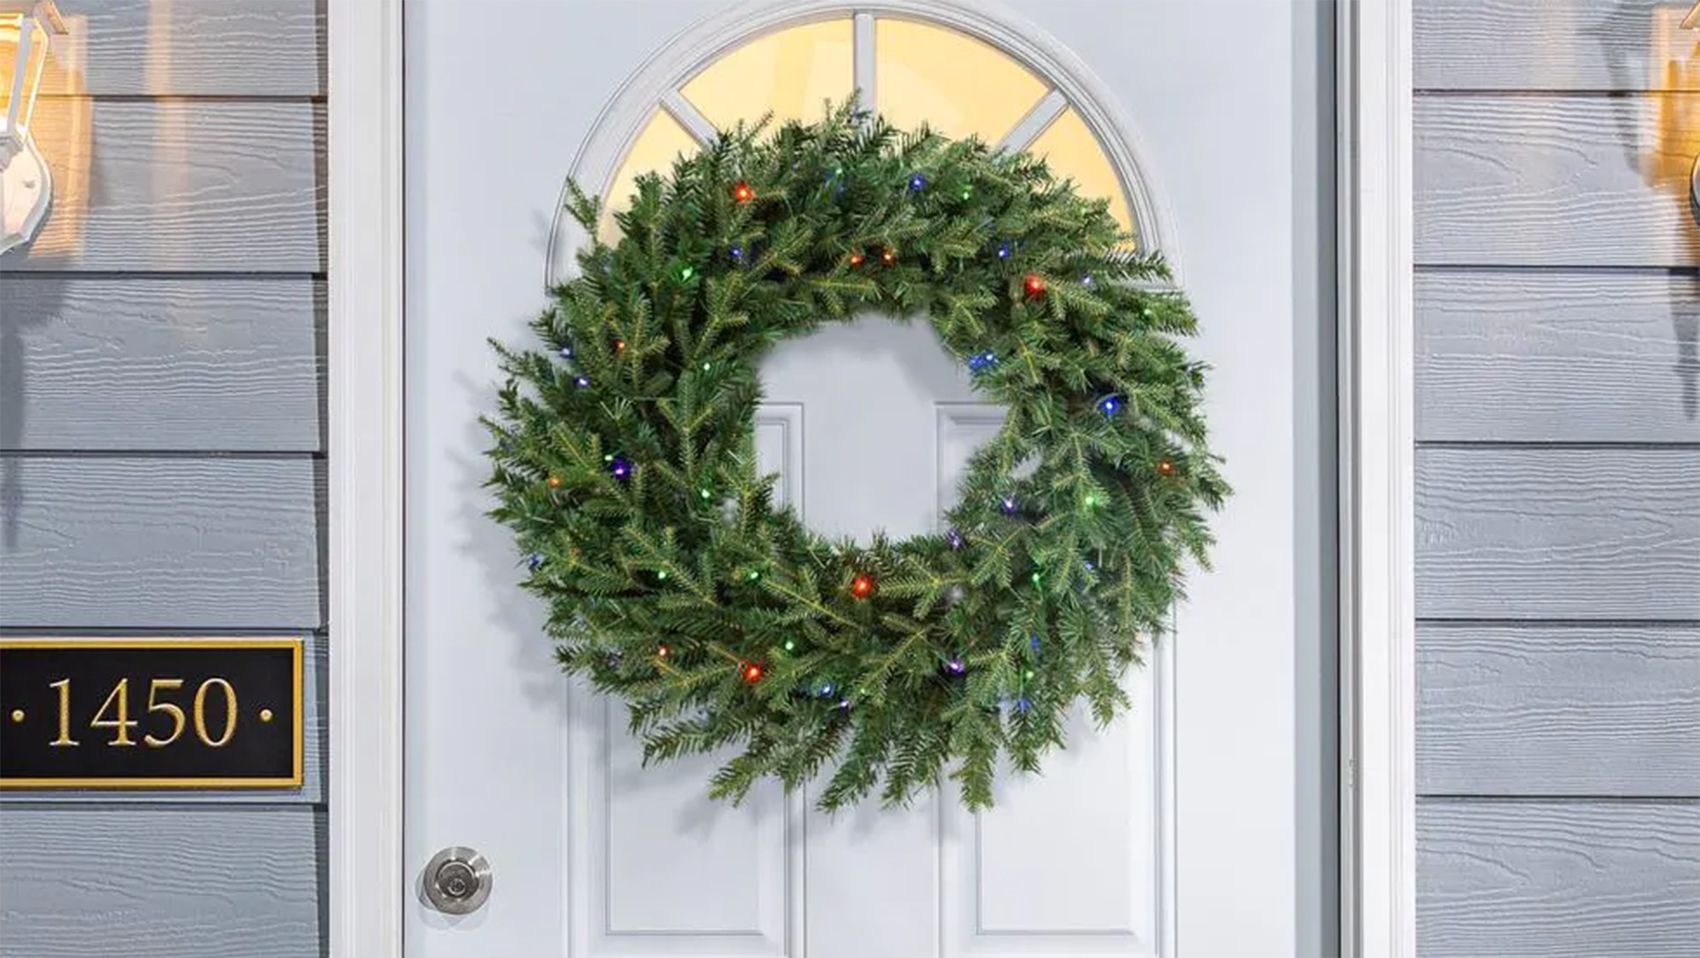 Gorgeous Decorations, Light Up Wreath Outdoor Home Depot